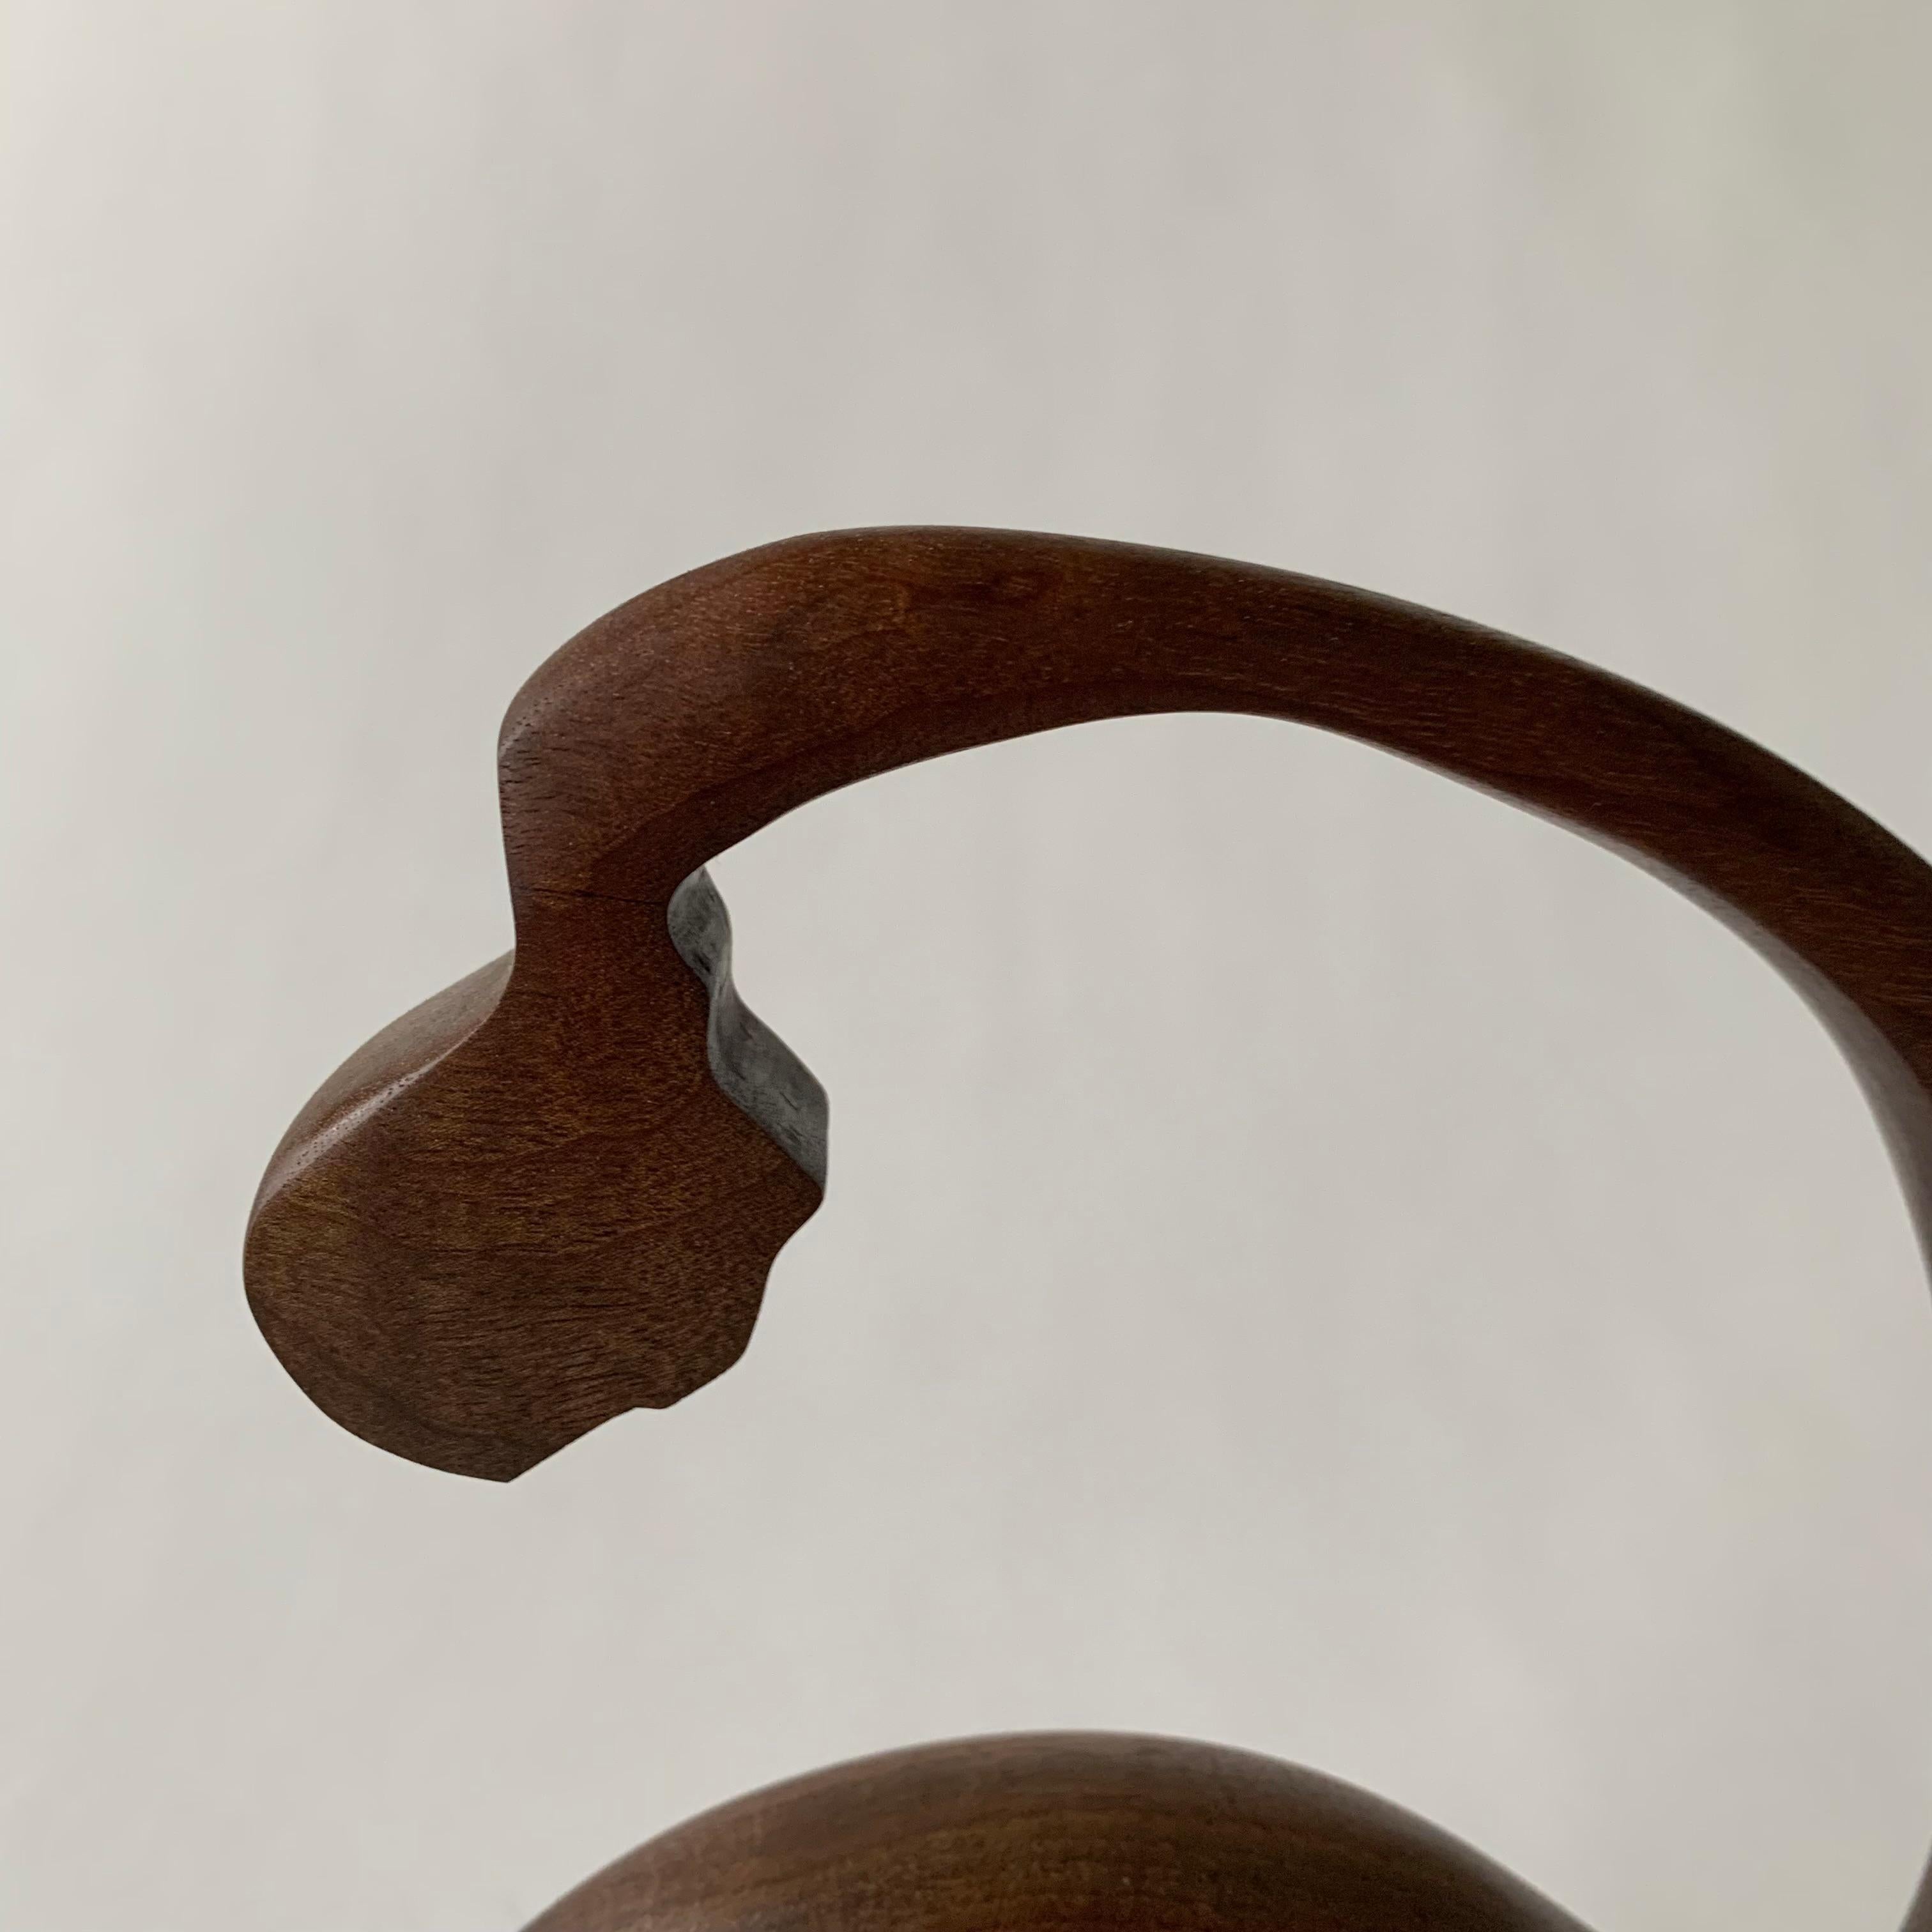 Walnut is one of the most beautiful of American hardwoods. Known for its fine-yet-open grain, unique patterns, and bold dark color. Hand carved, shaped, and polished, this wood melds into beautiful symmetry in this abstract sculpture. The natural